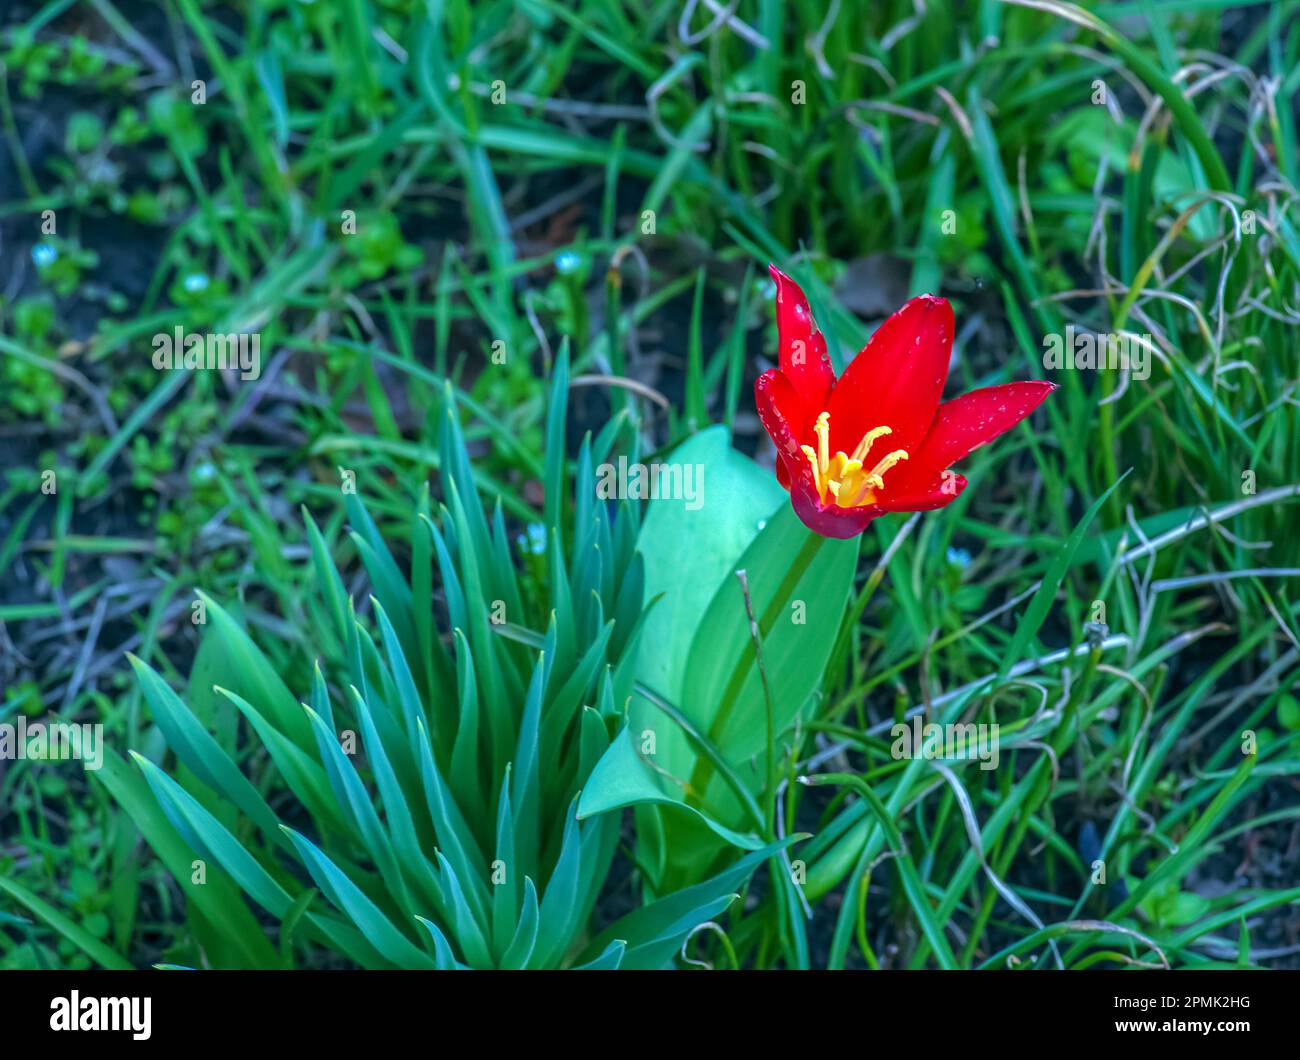 Tulipa schrenkii or Tulipa suaveolens, Schrenck's tulip, is a bulbous herbaceous perennial of species of tulip Tulipa in the family of the Liliaceae. Stock Photo